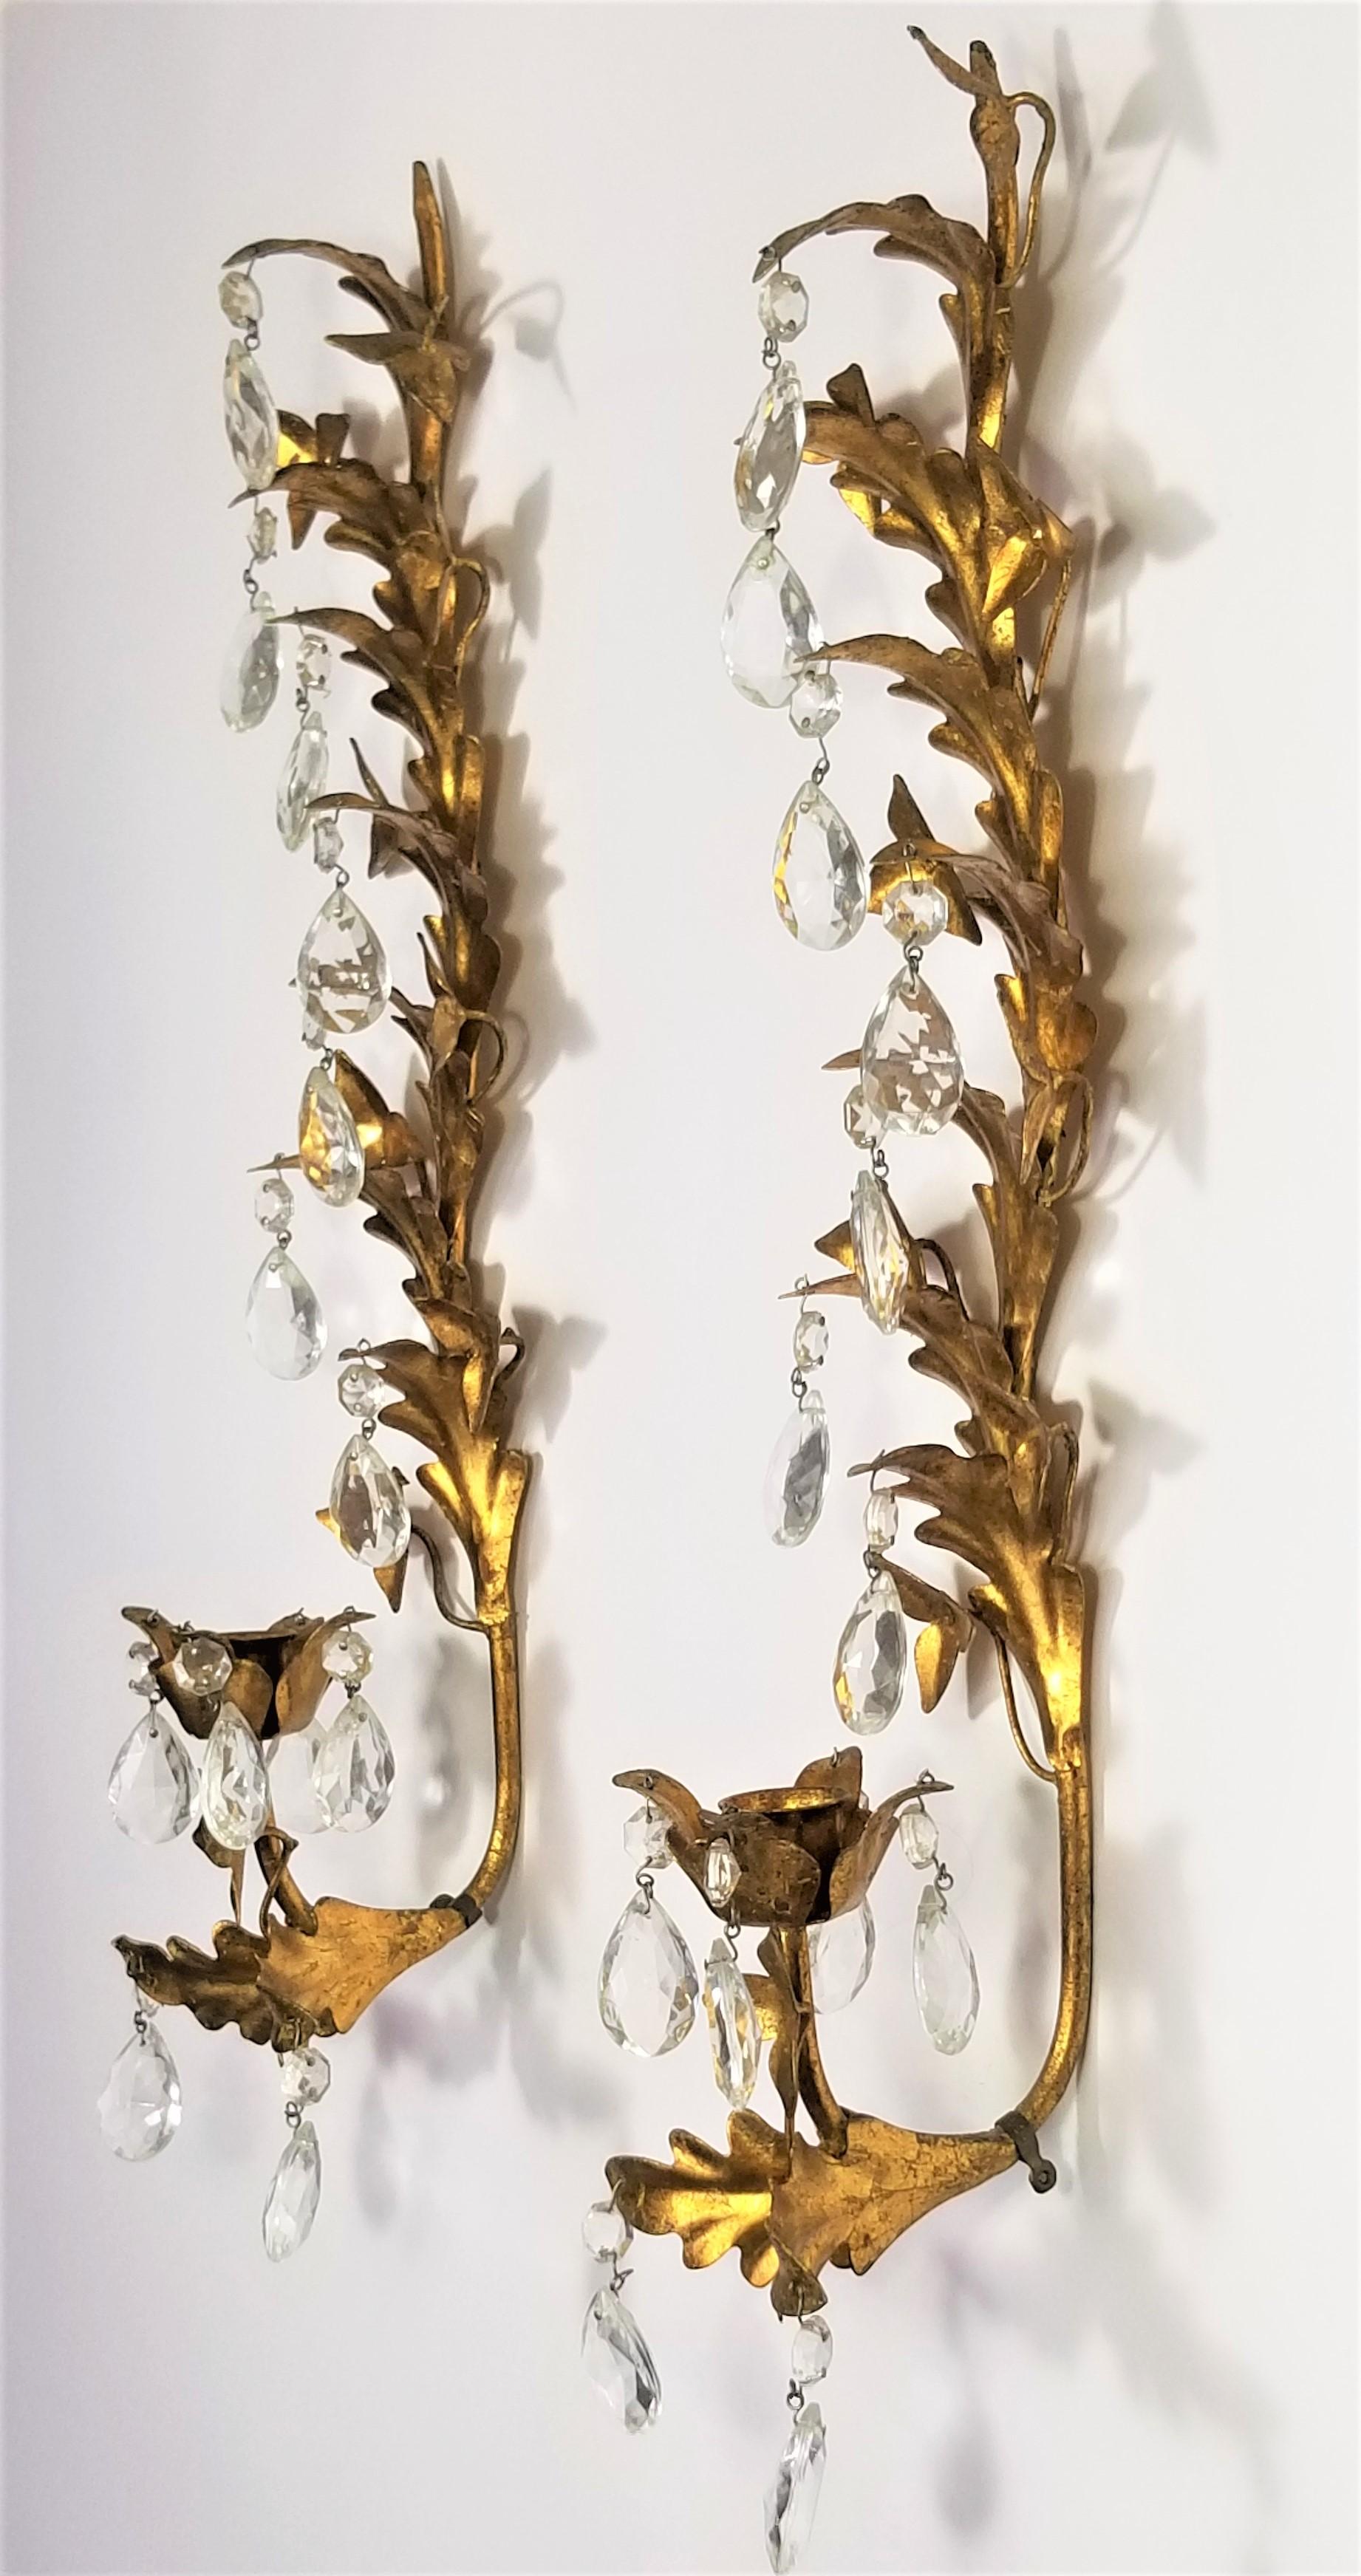 Italian Gilt Sconces with Crystals and Candleholders Made in Italy In Good Condition For Sale In New York, NY